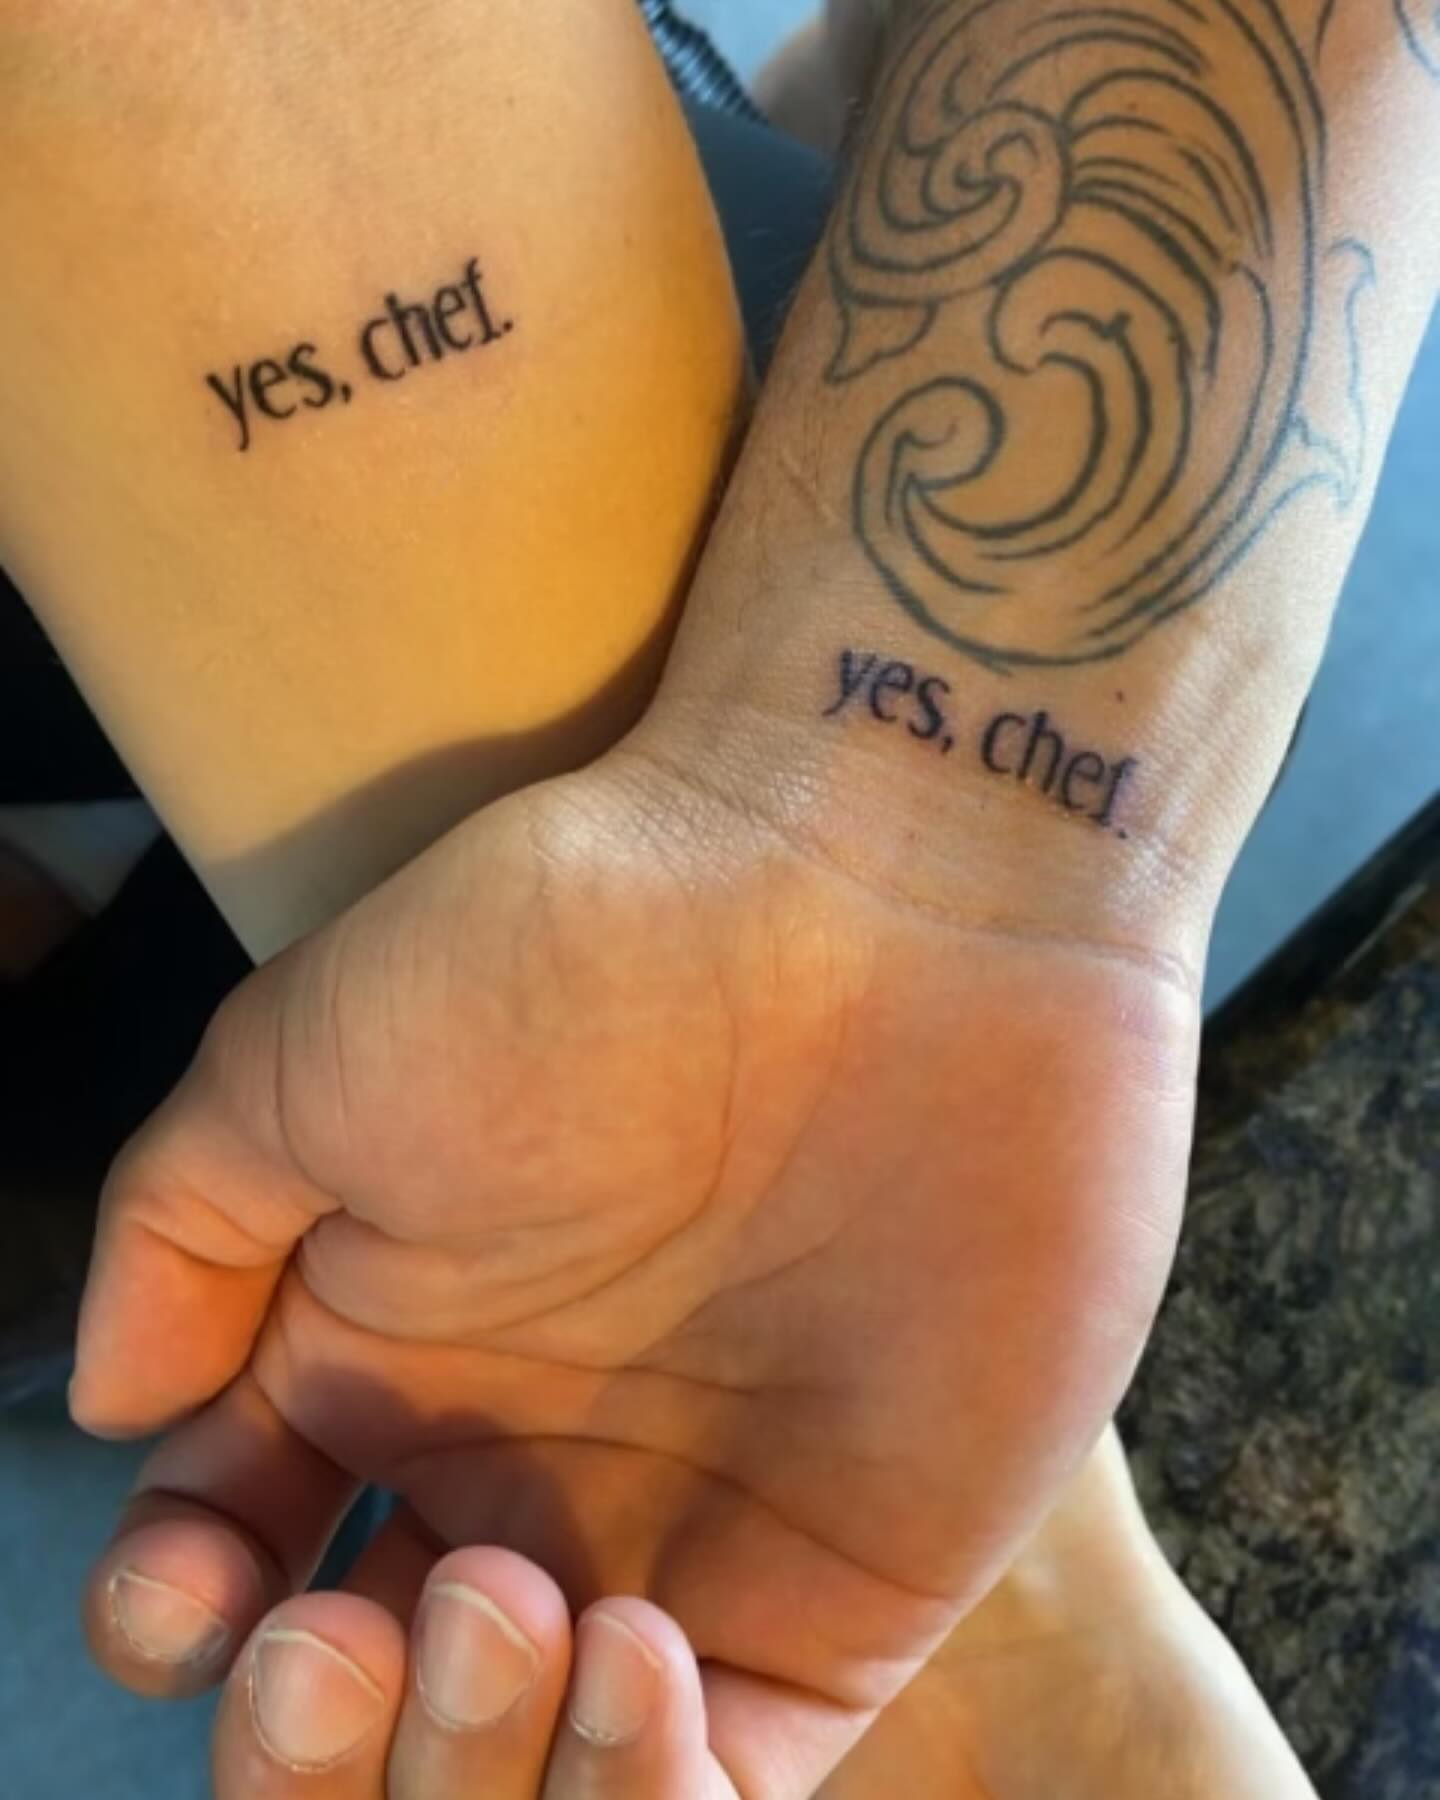 Just wanted to show my girlfriend and I's new tattoos : r/TwistedWonderland